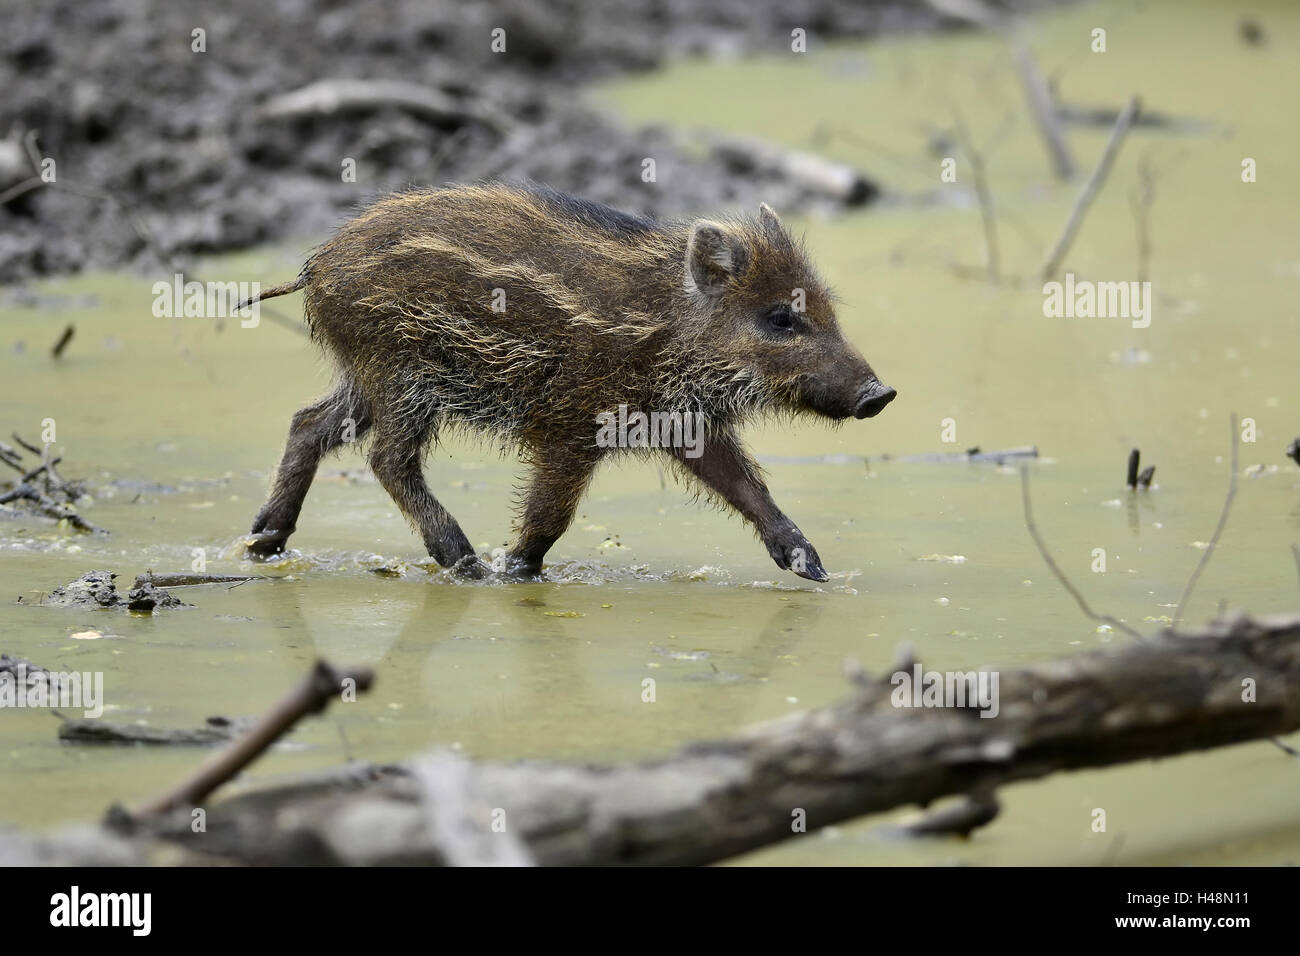 Wild boar's young wild boar, going, water, Stock Photo